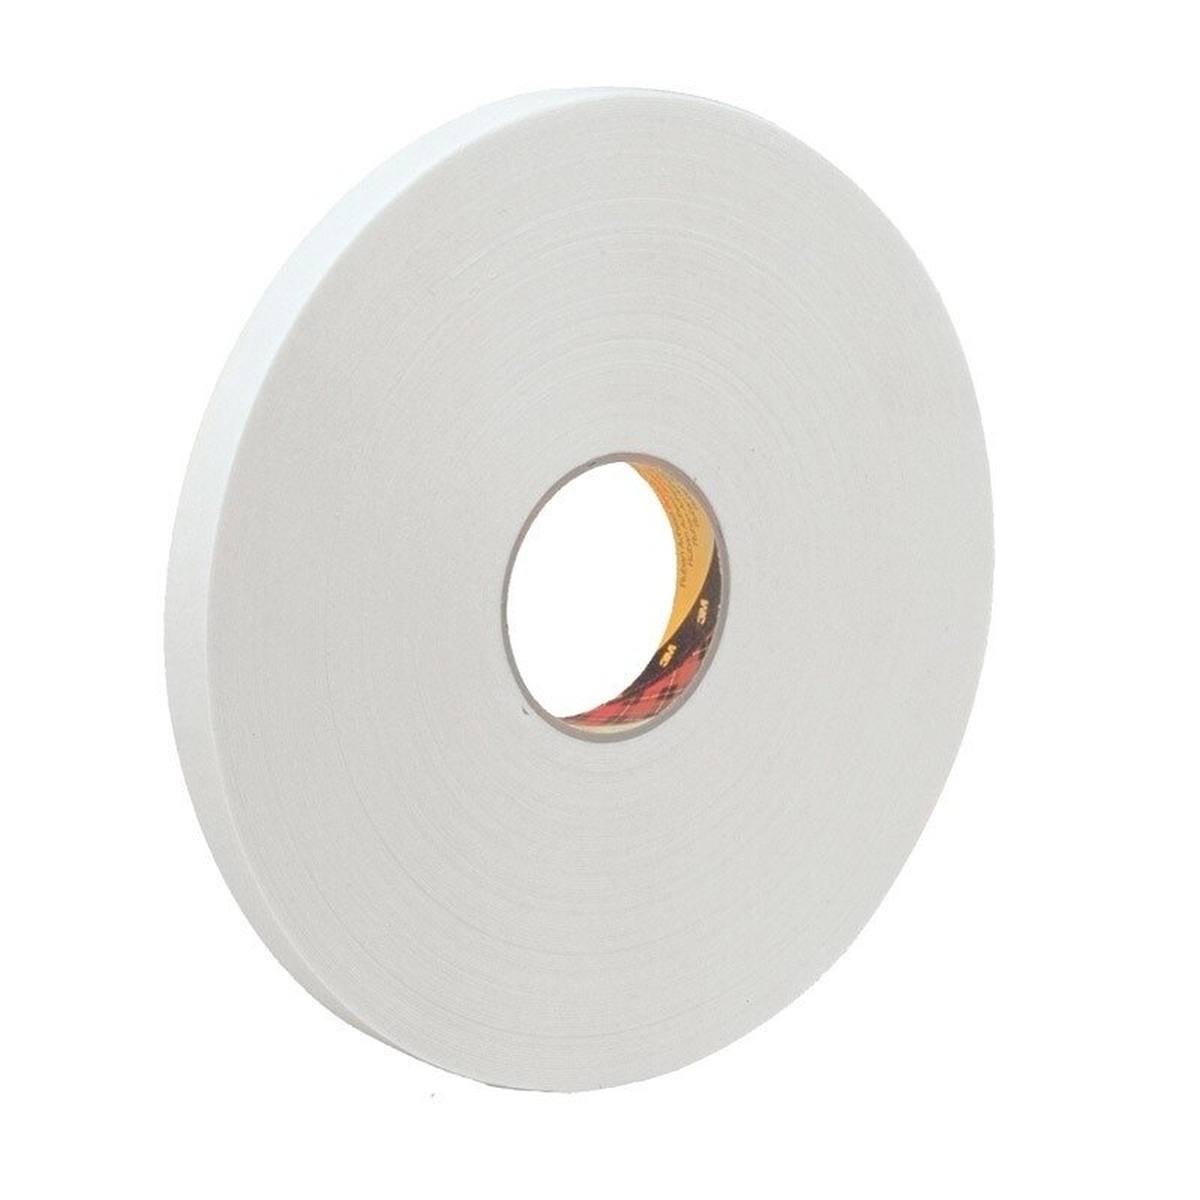 3M PE foam adhesive tape with acrylic adhesive 9539, white, 12 mm x 66 m, 0.8 mm